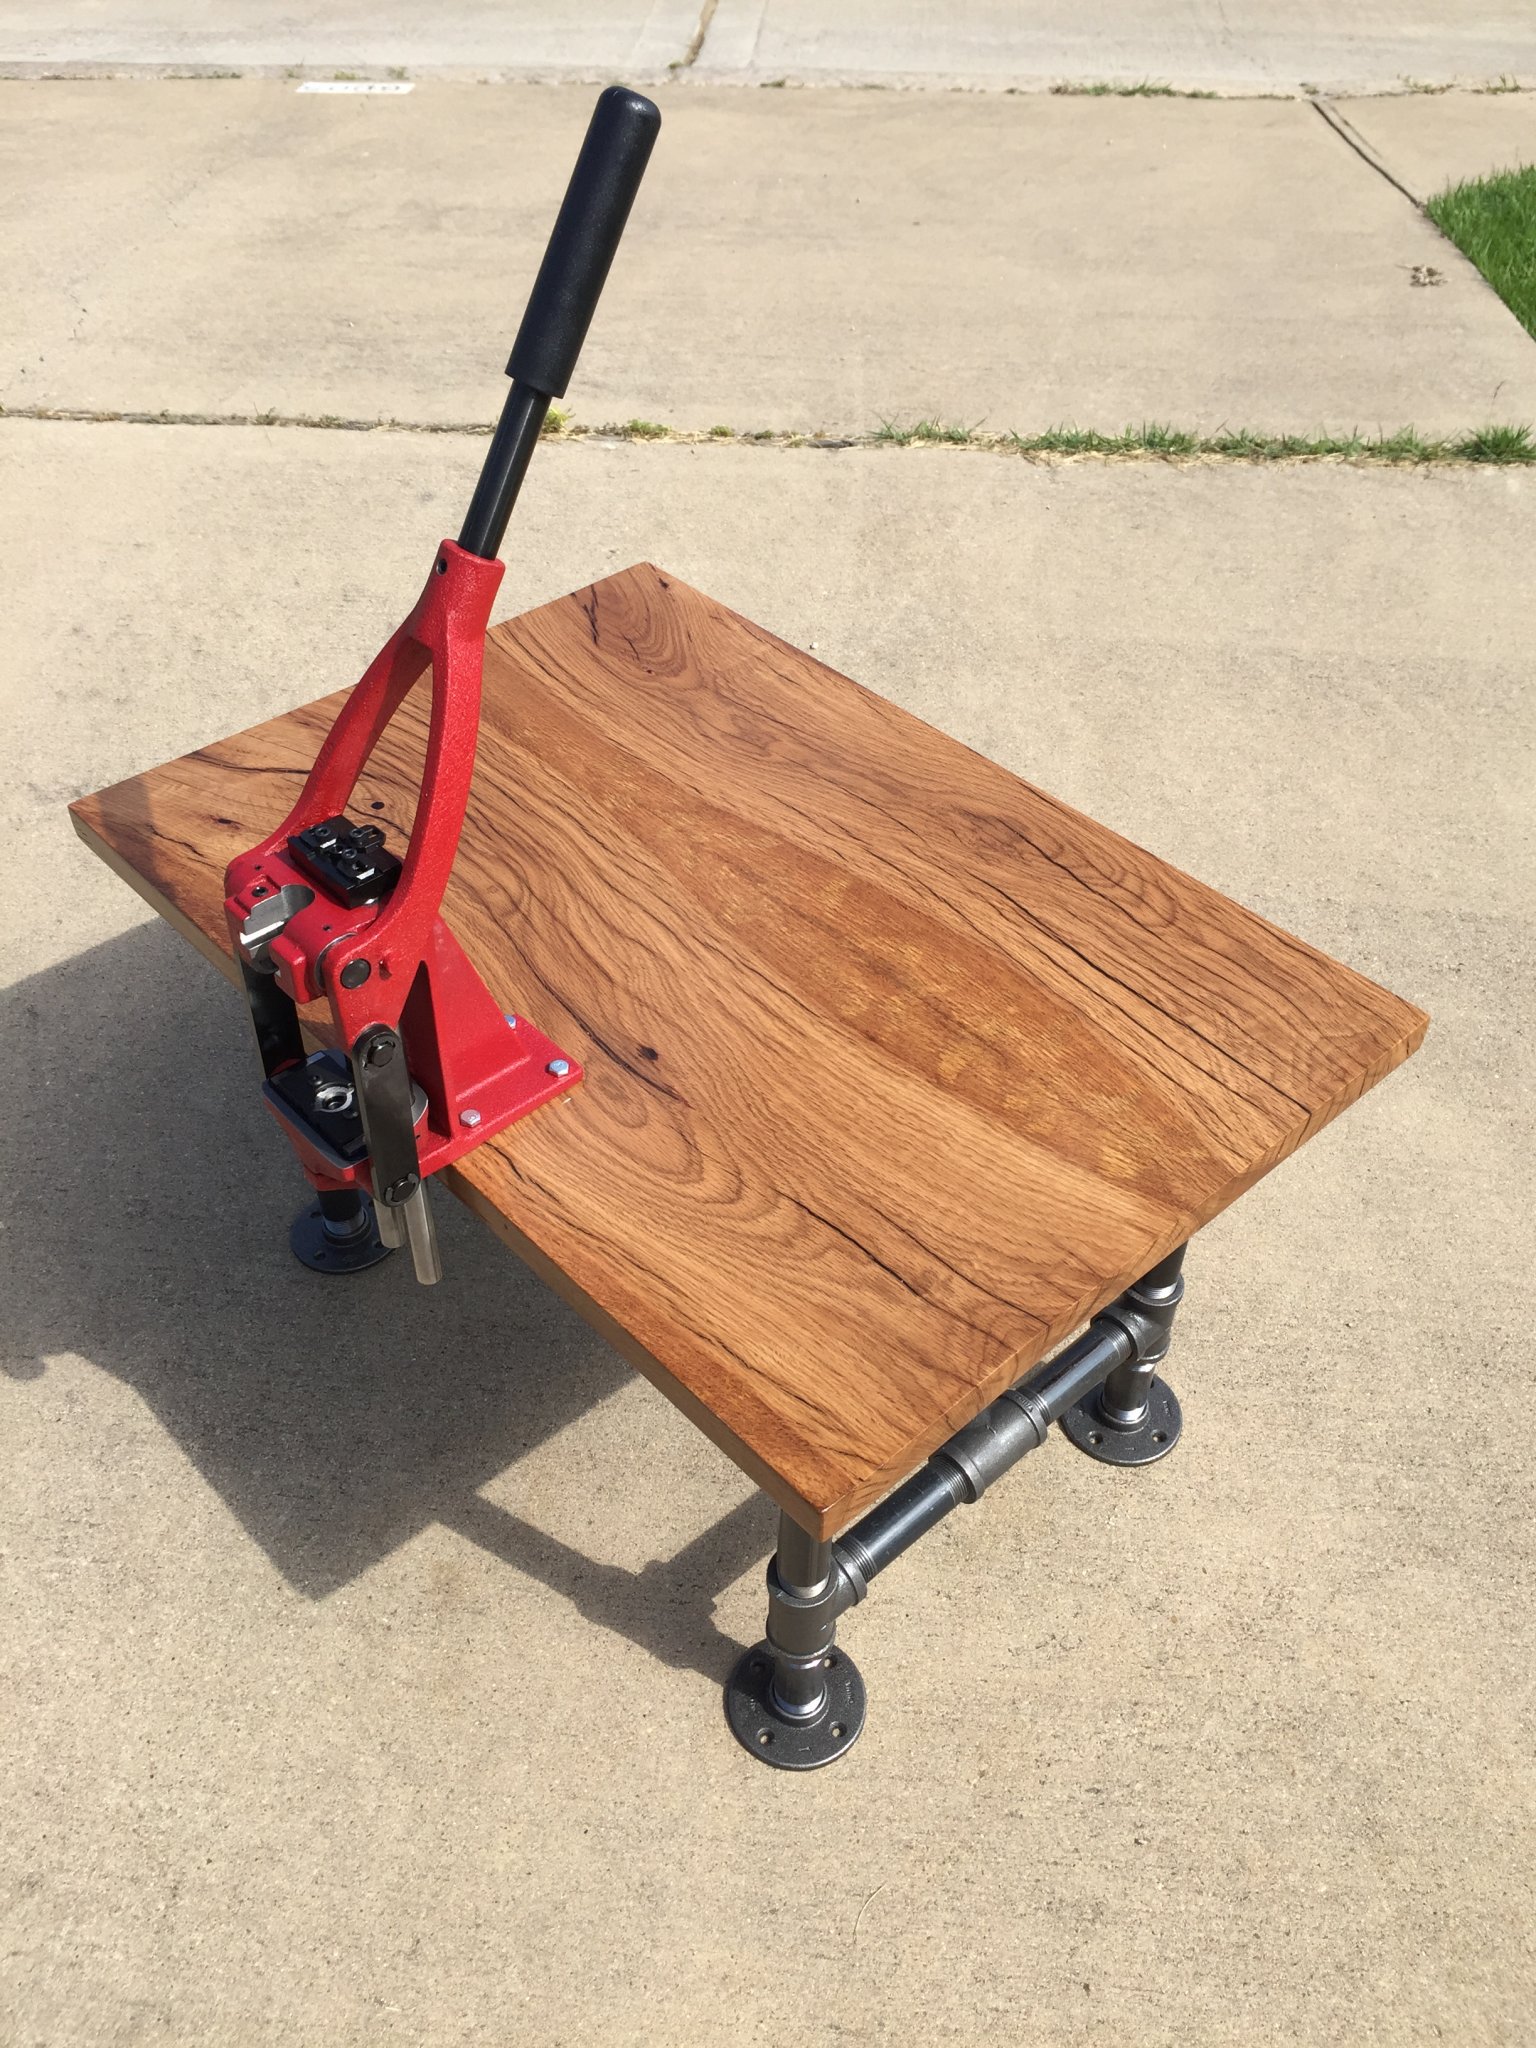 Tricked out Black & Decker Workmate and Bench Bull Accessory 